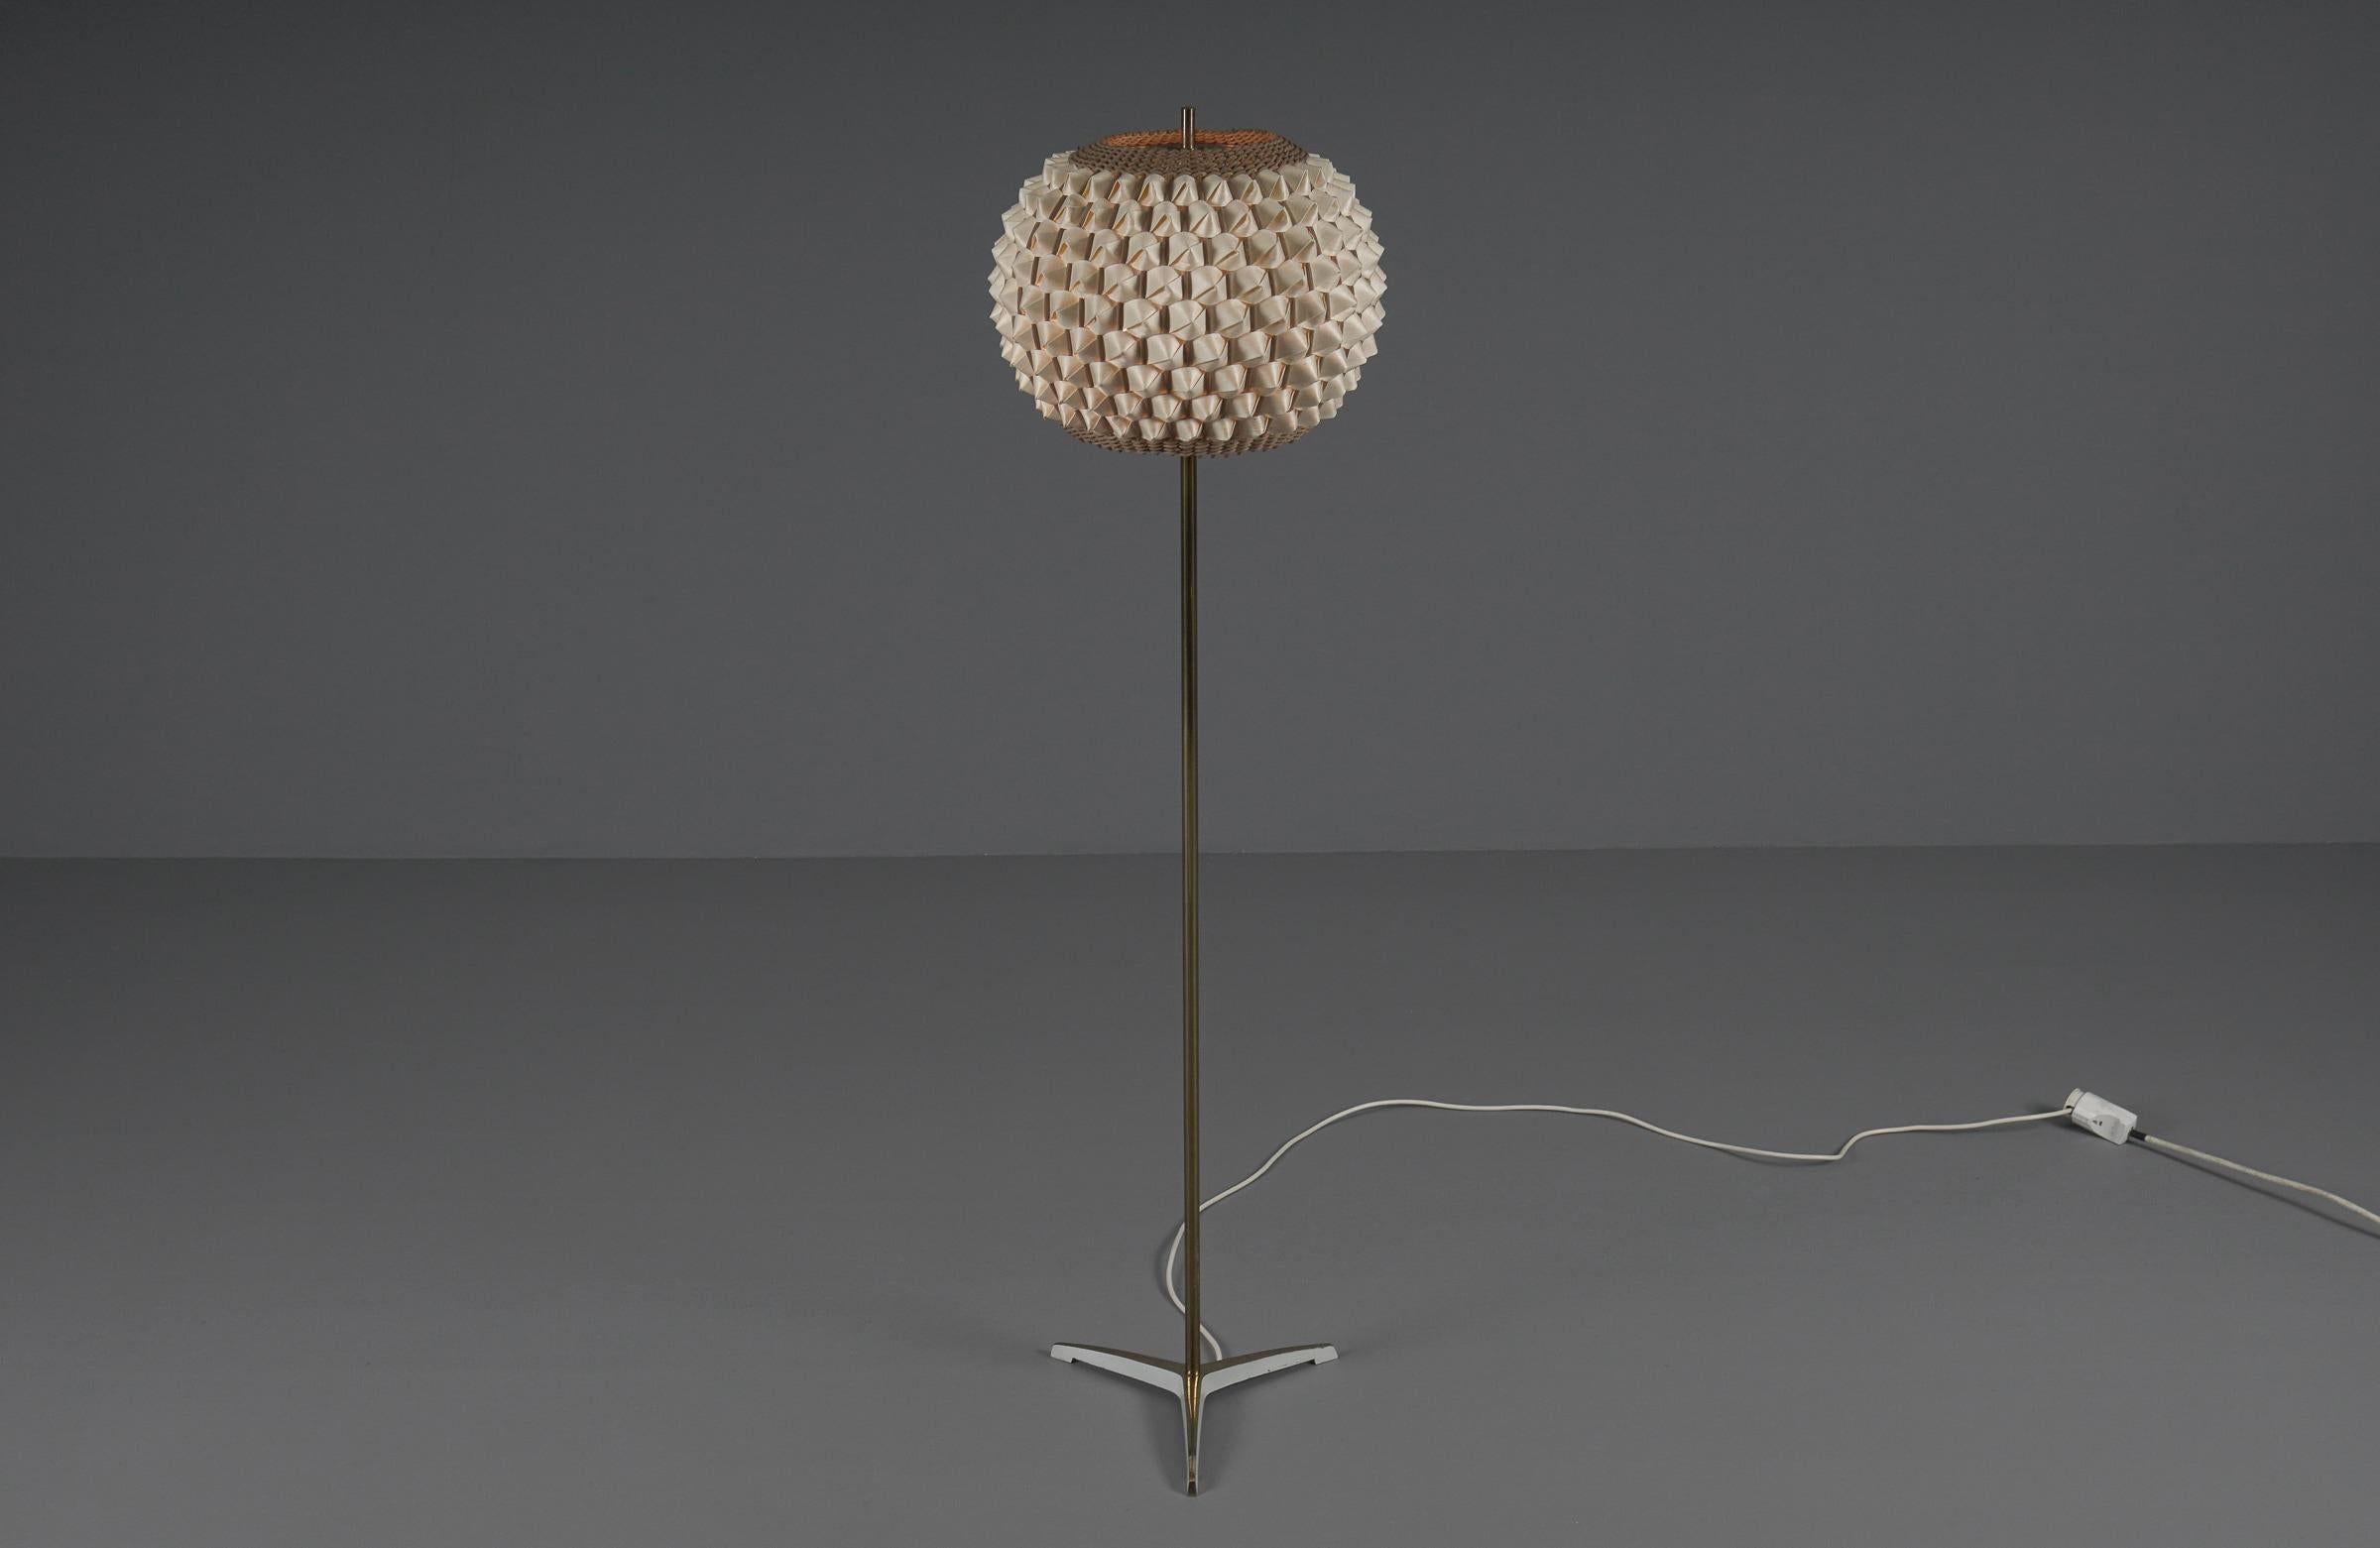 Mid-20th Century Tripod Floor Lamp with Wicker Lamp Shade, 1950s Italy For Sale